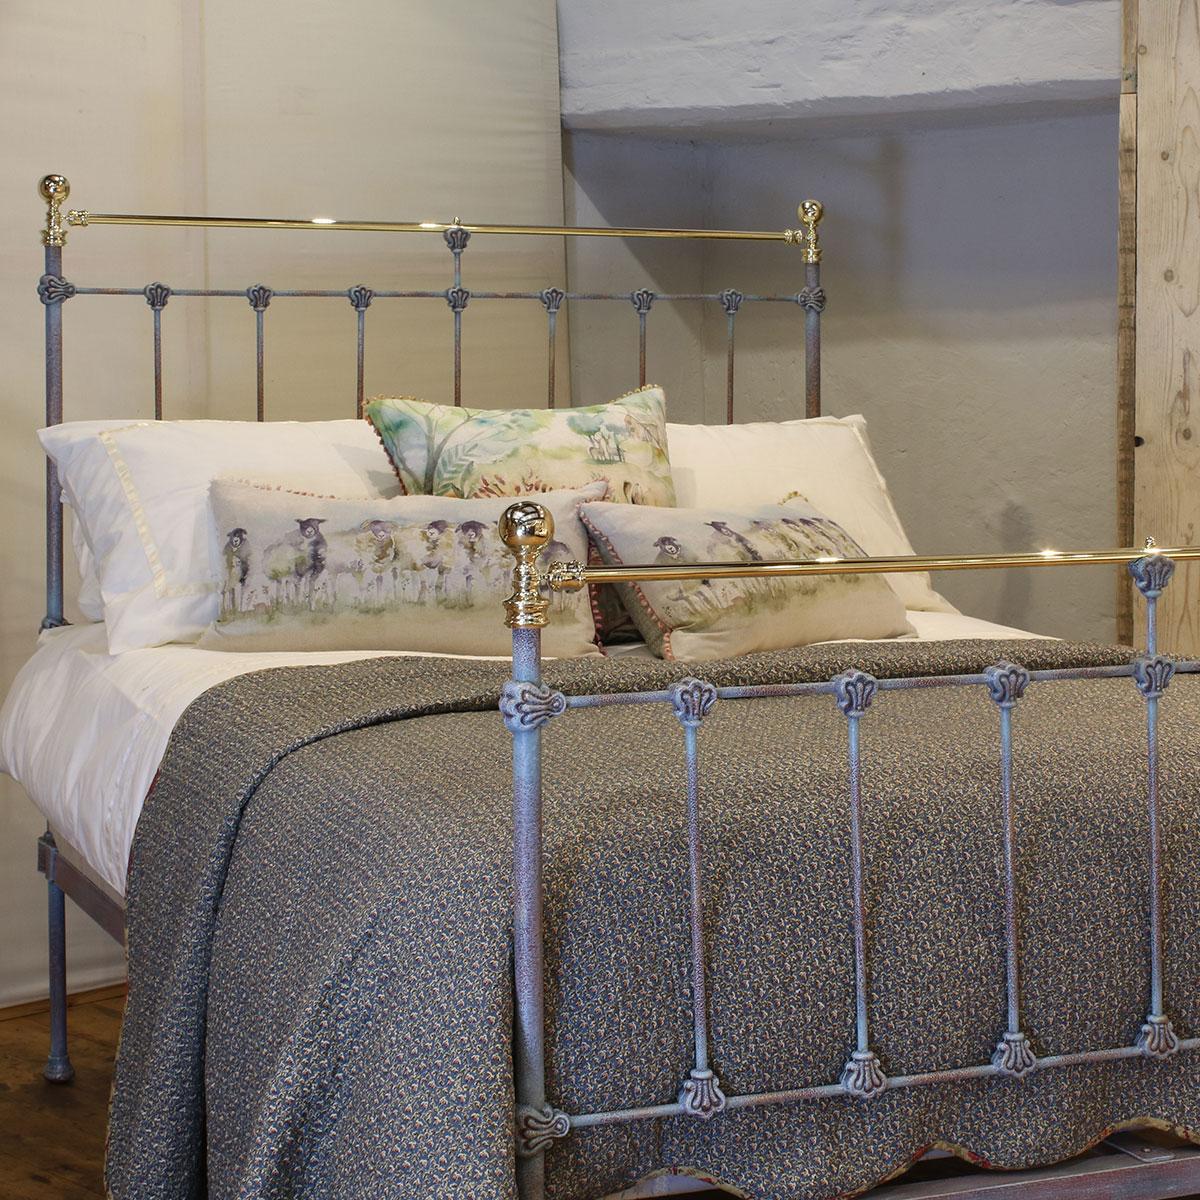 Late Victorian antique brass and iron bed finished in blue verdigris, with straight brass top rail, cast collars and round knobs. 

This bed accepts a double size 4ft 6in wide (54 inch or 135cm) base and mattress.

The price includes a firm